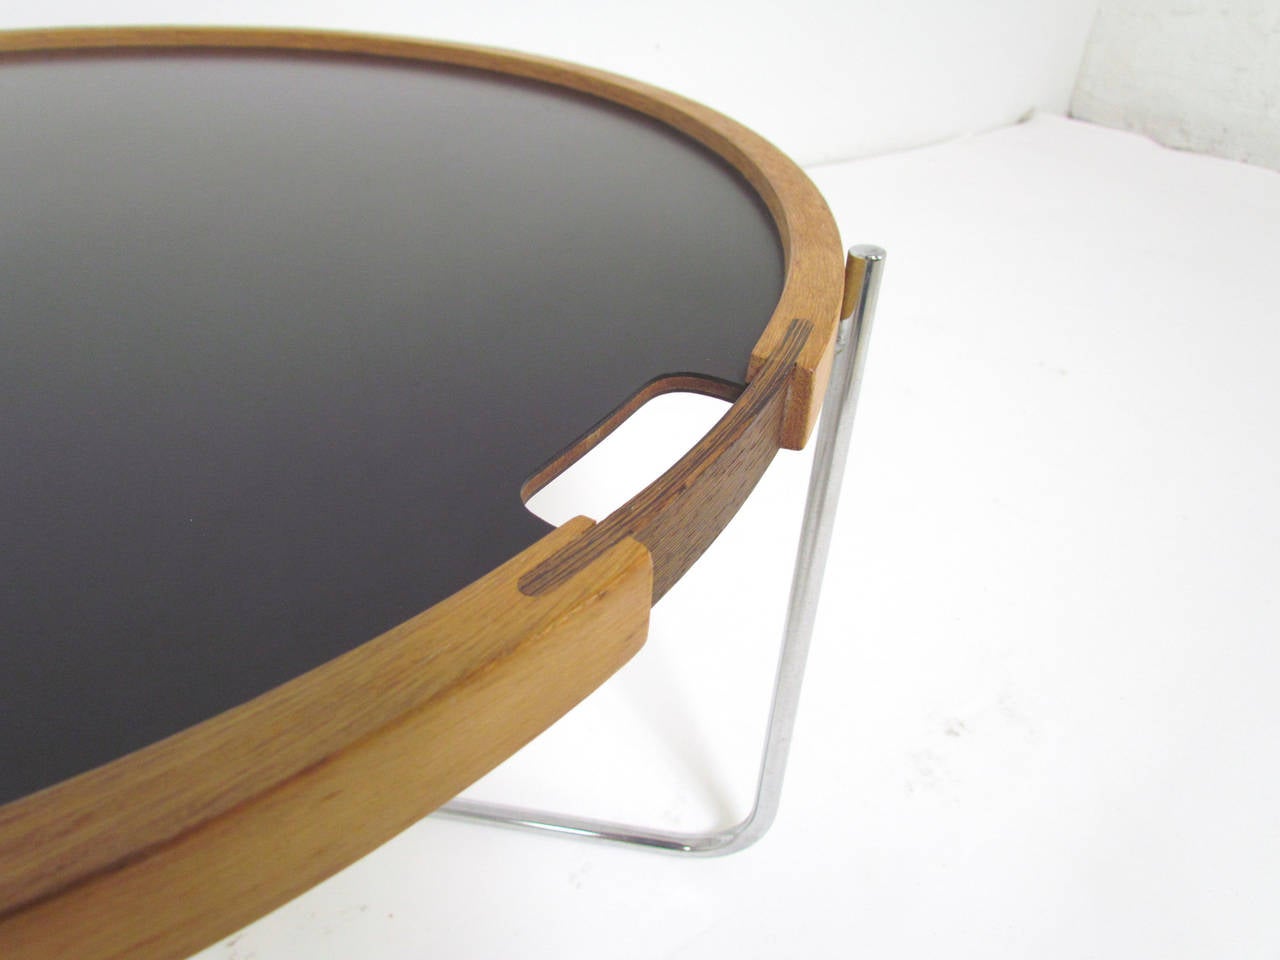 Original period occasional table with removable tray designed by Hans Wegner for GETAMA, circa early 1970s. Double sided black or white laminate surface, ringed in oak, with a wenge wood handle. Chromed steel base folds for easy storage.